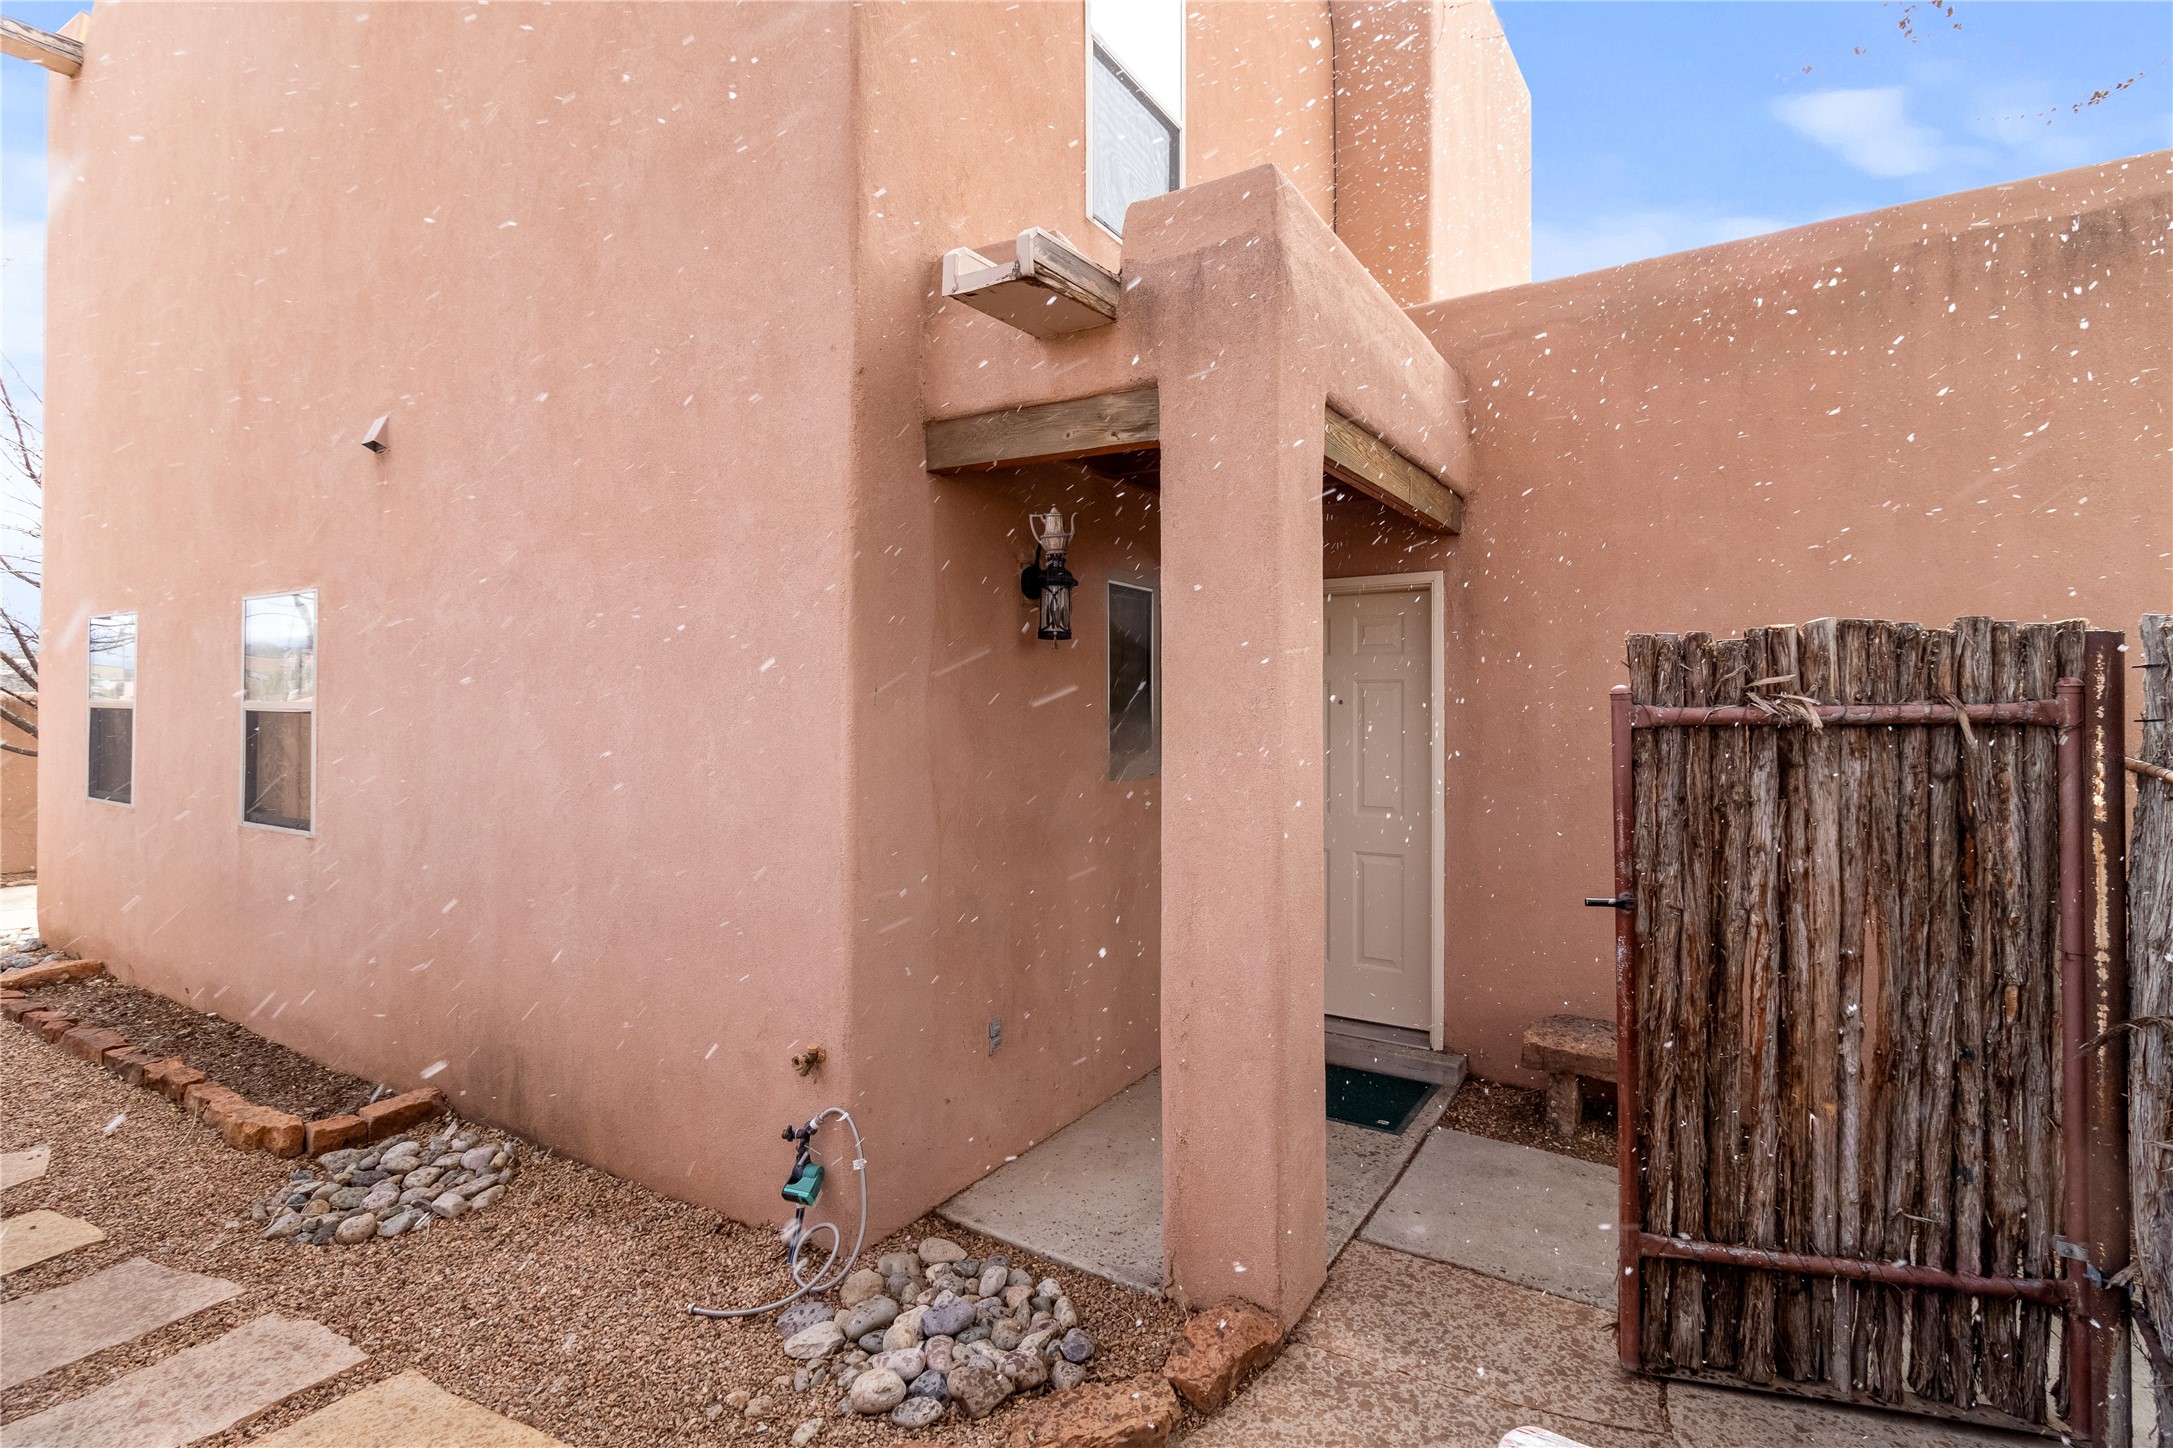 3300 Rufina Street A-1, Santa Fe, New Mexico 87507, 2 Bedrooms Bedrooms, ,2 BathroomsBathrooms,Residential,For Sale,3300 Rufina Street A-1,202400808